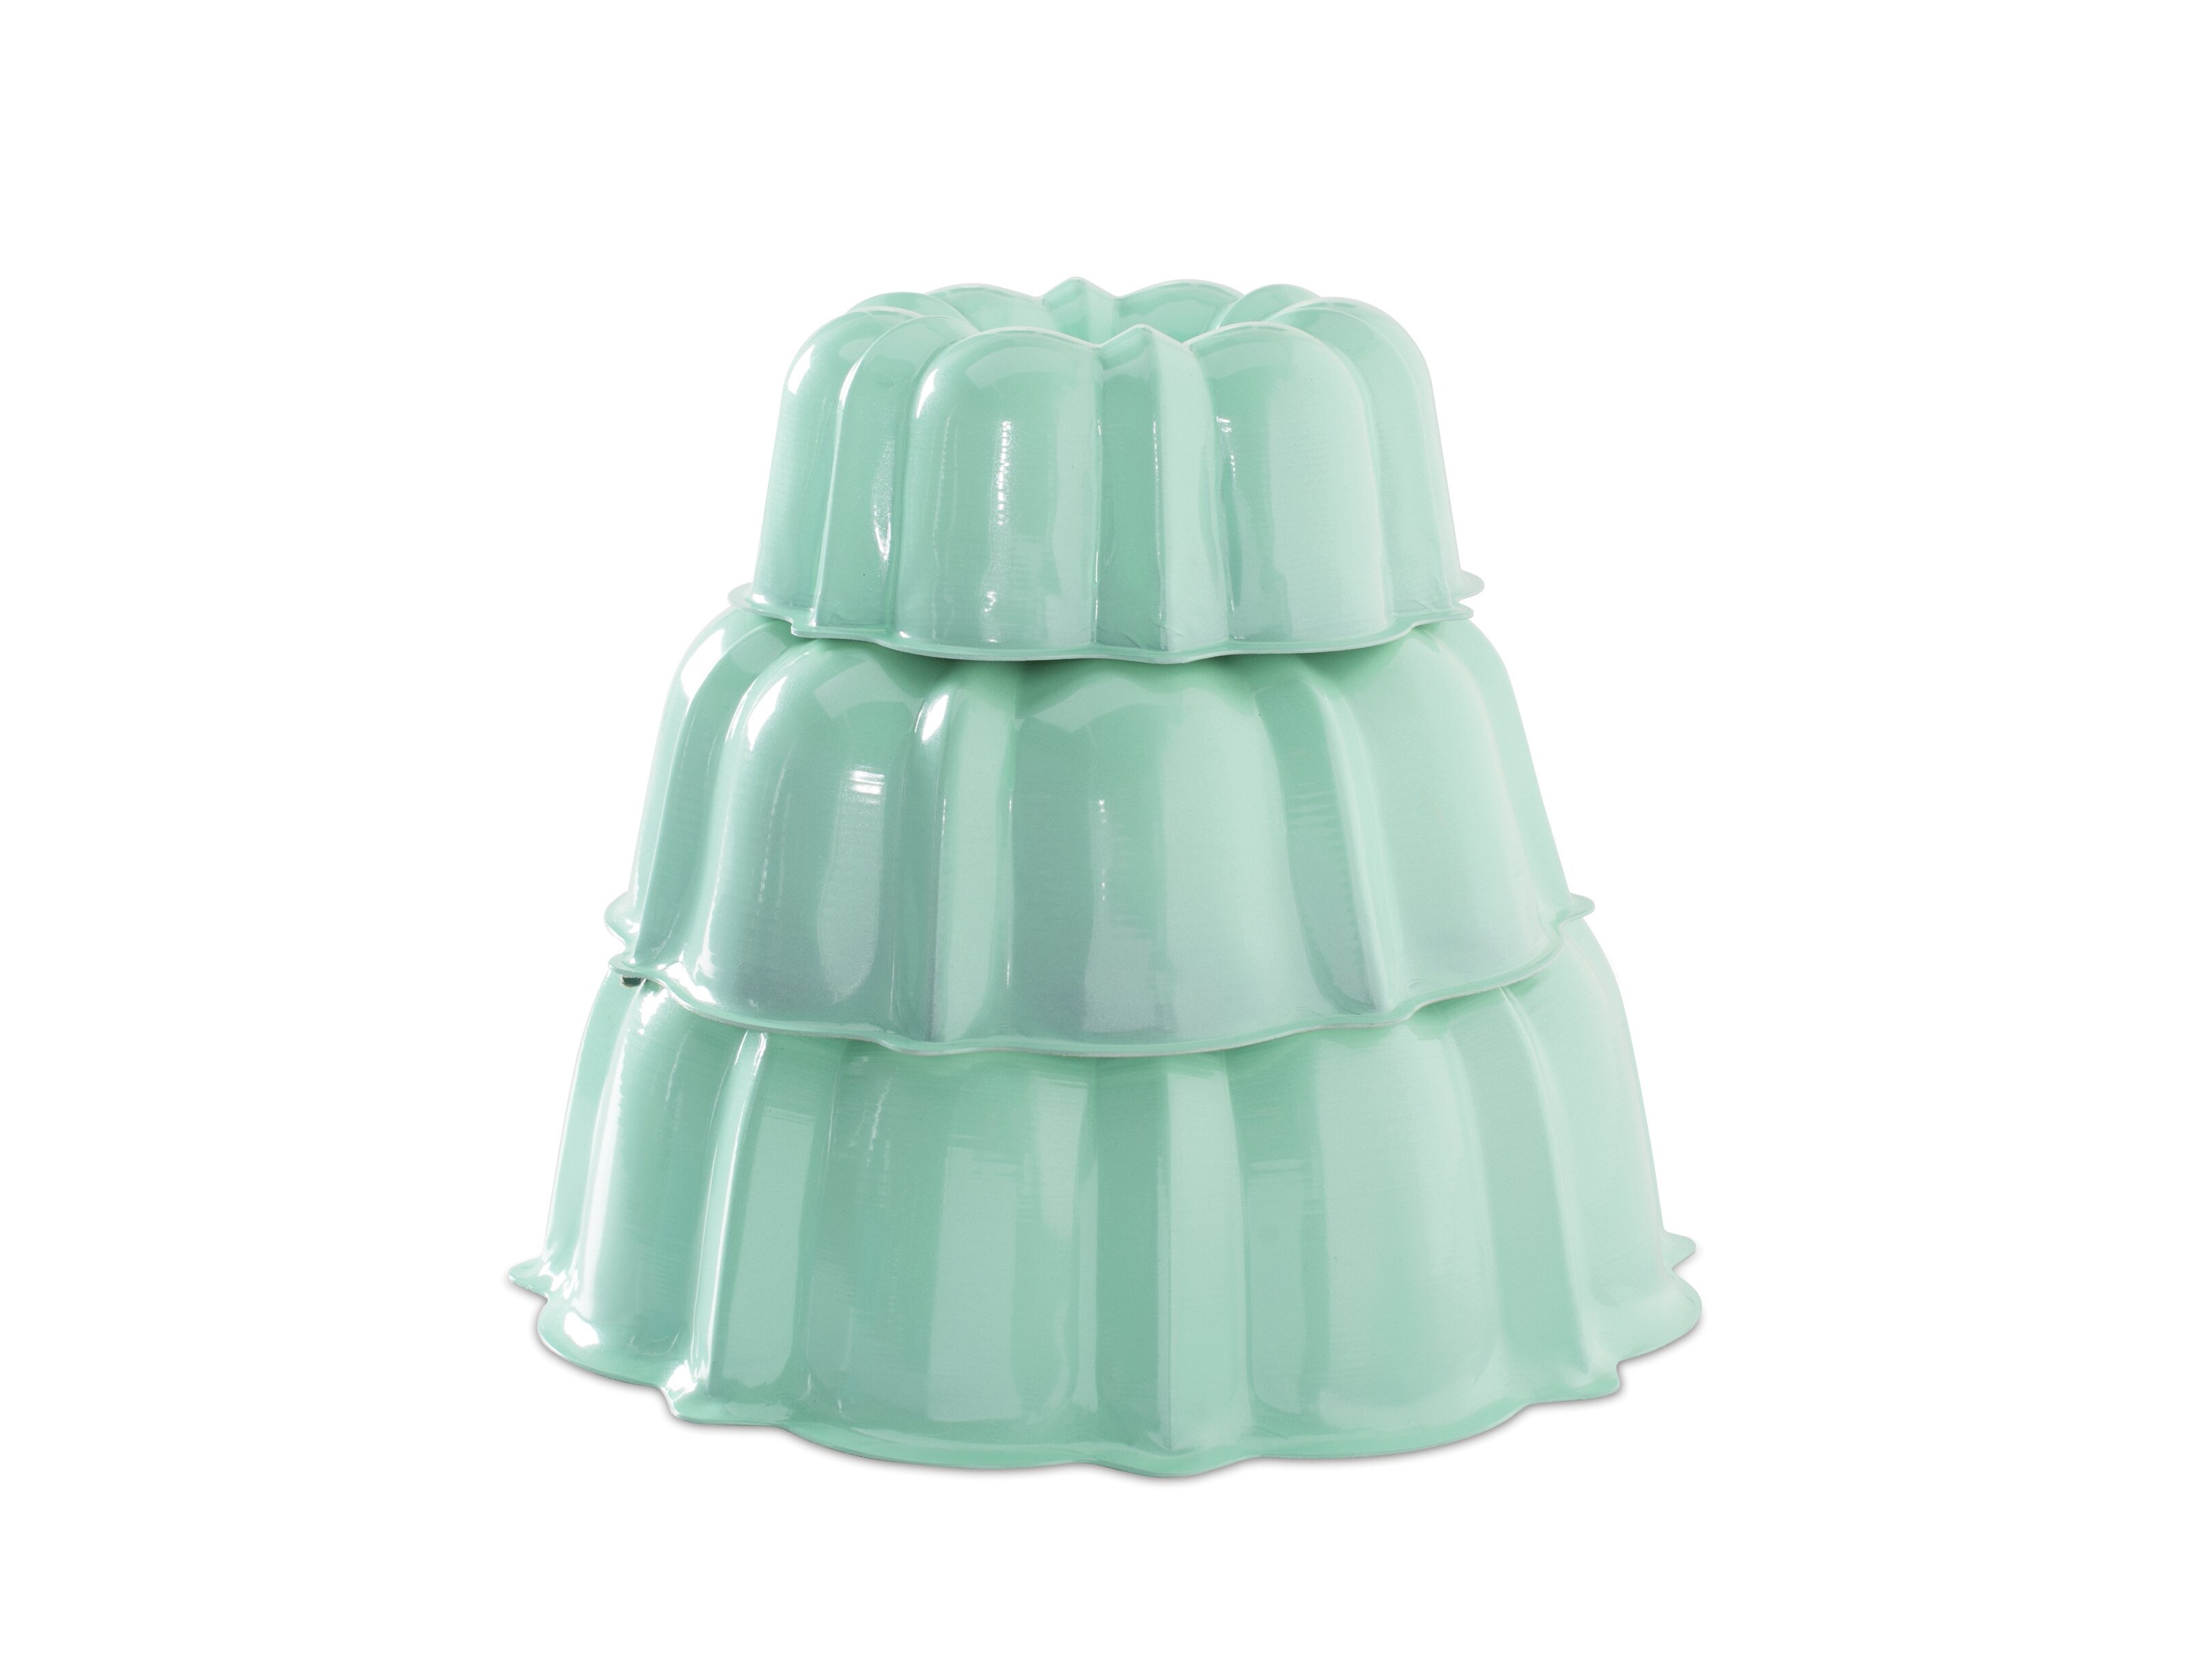 Shop This Nordic Ware Tiered Heart Bundt Cake Pan From  For $34